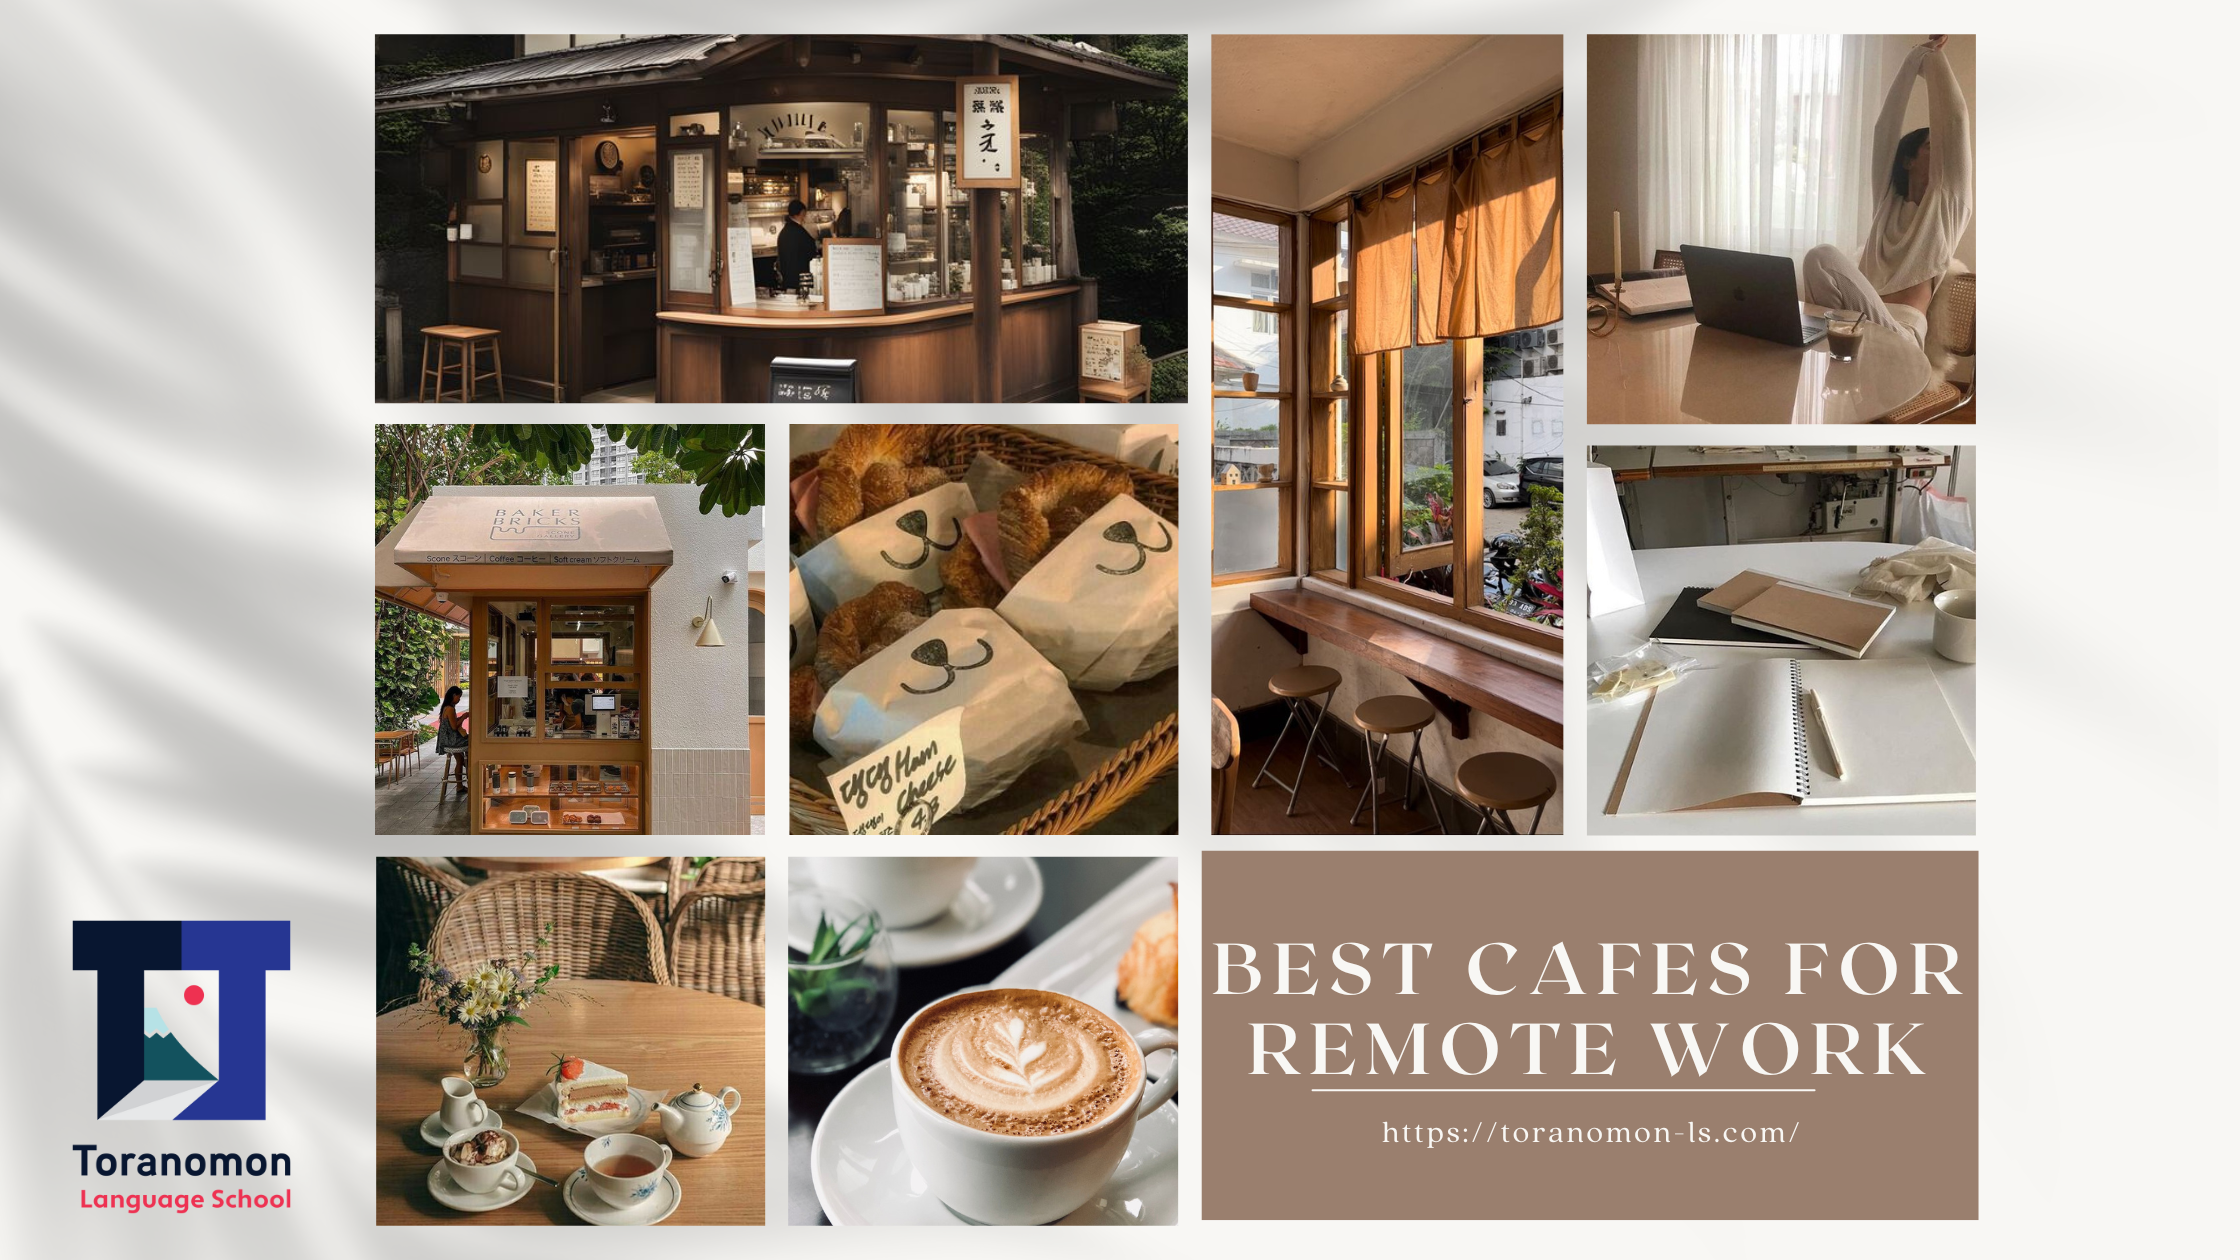 Best cafes to work remotely